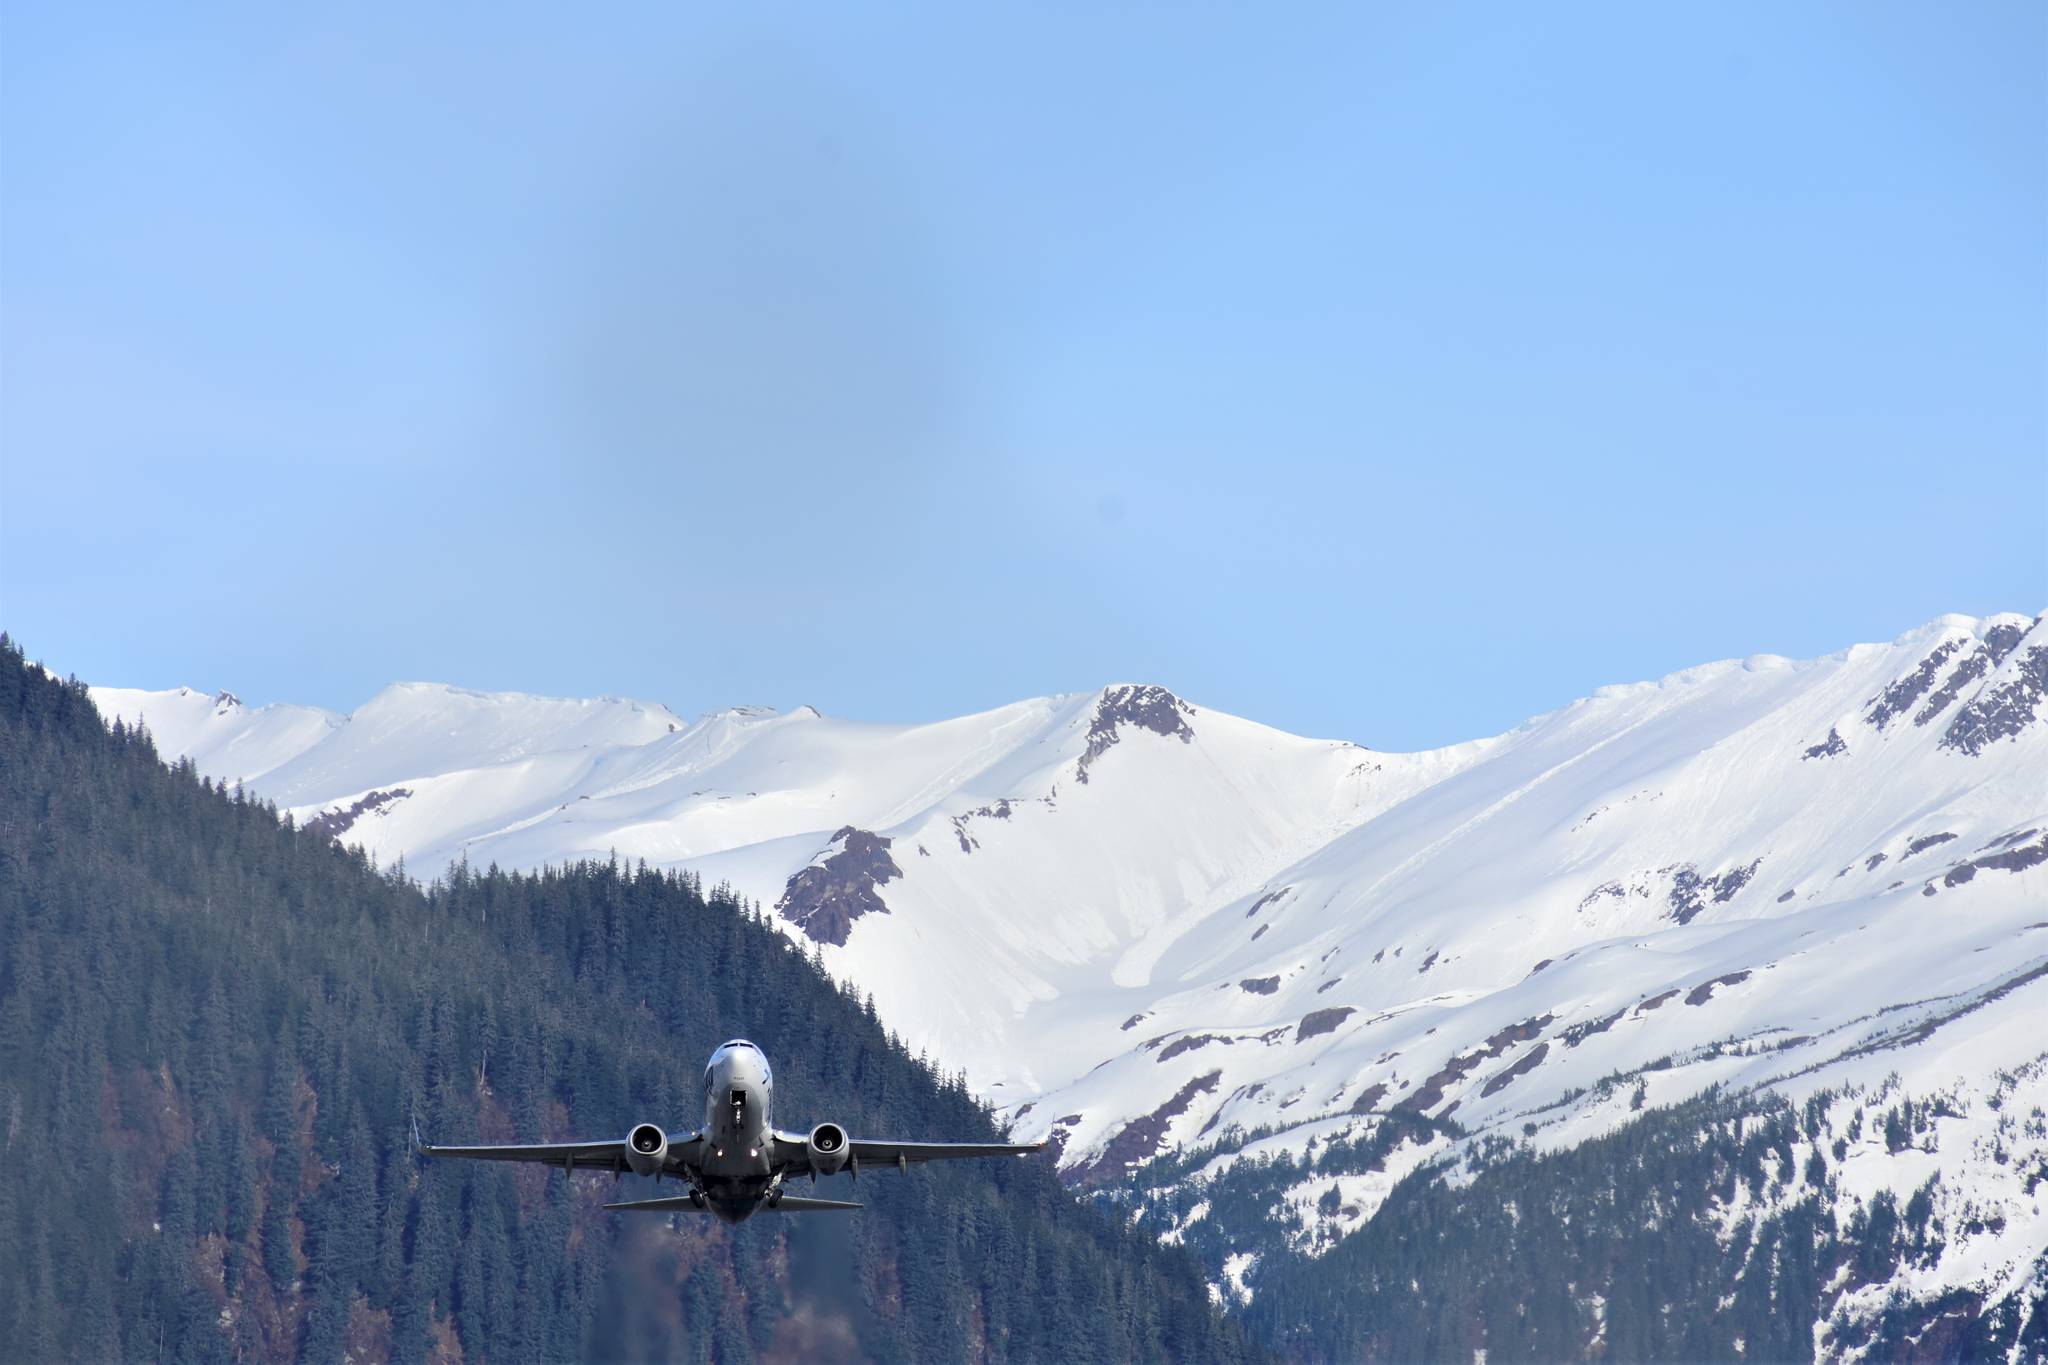 A plane takes off from Juneau International Airport on Thursday. May 7, 2020. City and Borough of Juneau Assembly members have concerns about more travels coming from out of state potentially spreading COVID-19. (Peter Segall | Juneau Empire)